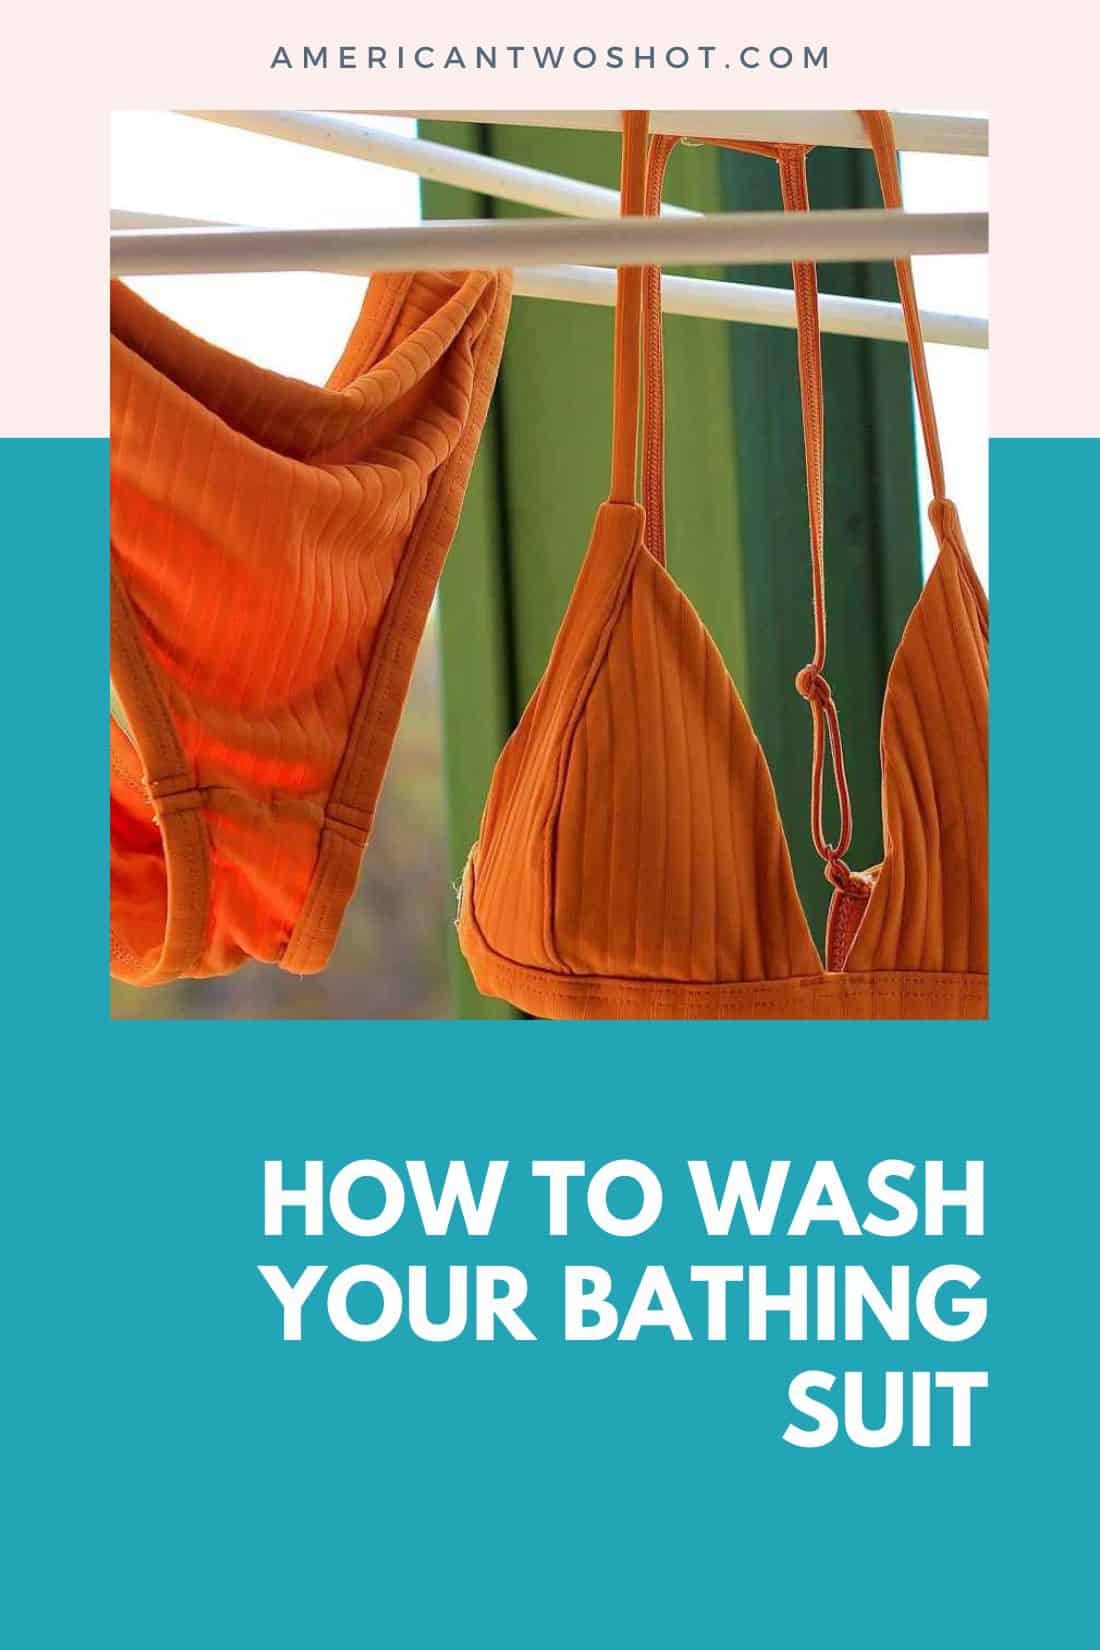 How to Wash Your Bathing Suit A Step-by-Step Guide